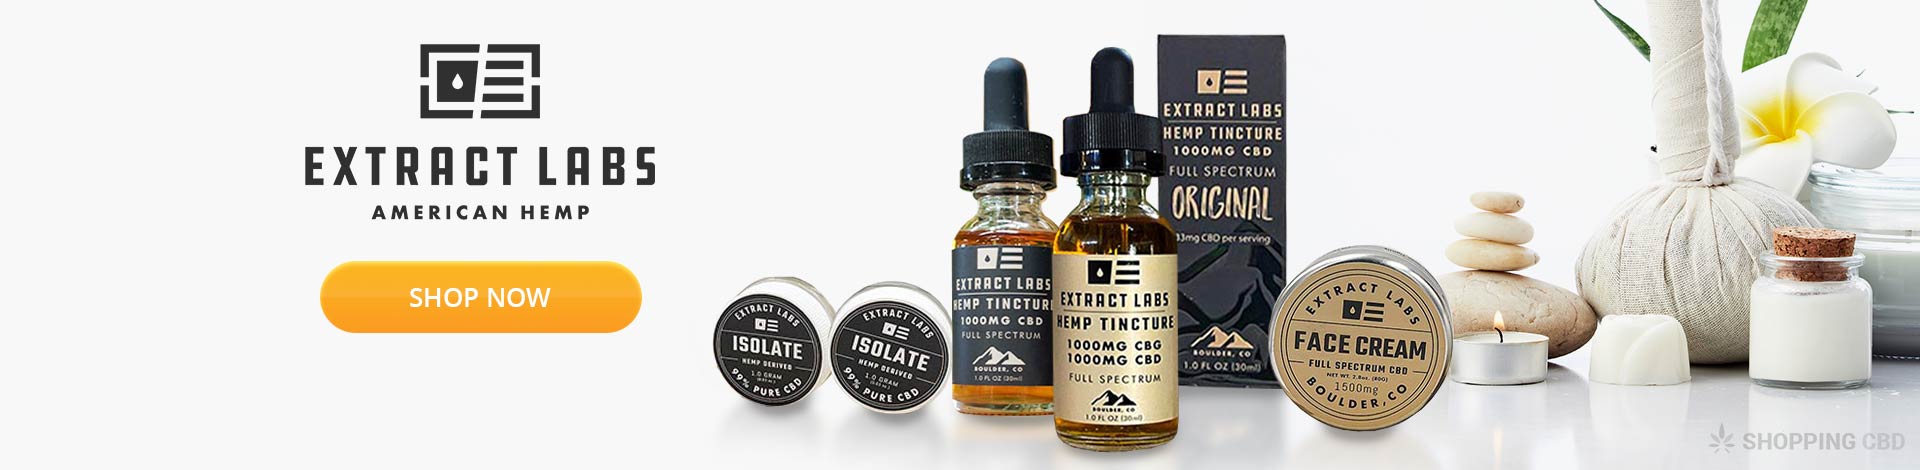 Extract Labs